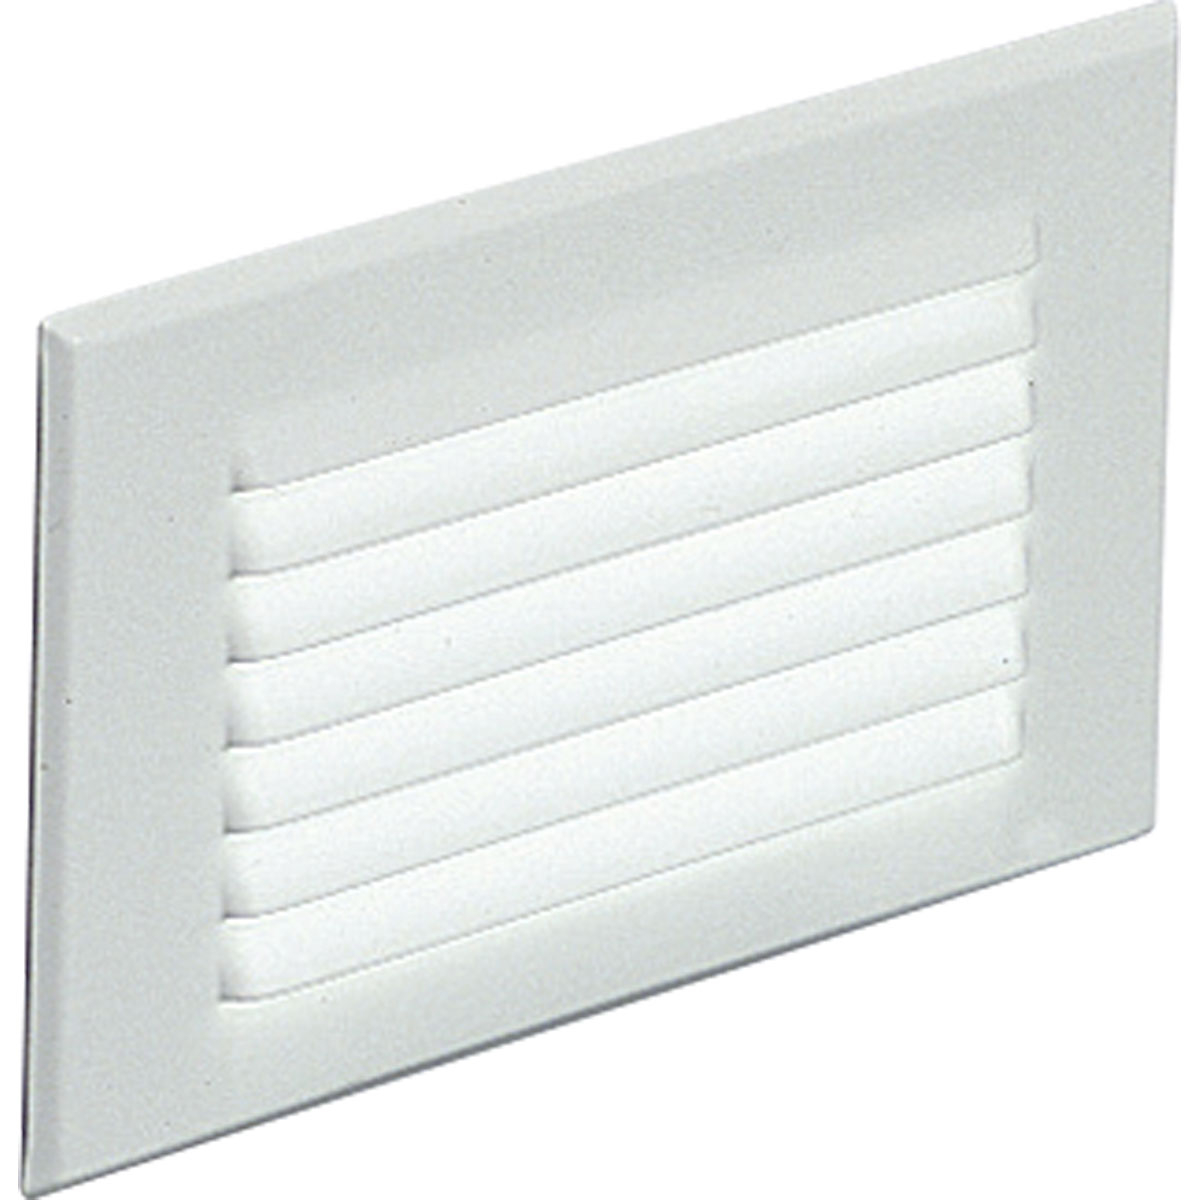 Spring-held white louver faceplate. Metal housing has 1/2 in I.P. conduit entry. For indoor and protected outdoor use. Standard 120V NPF ballast.